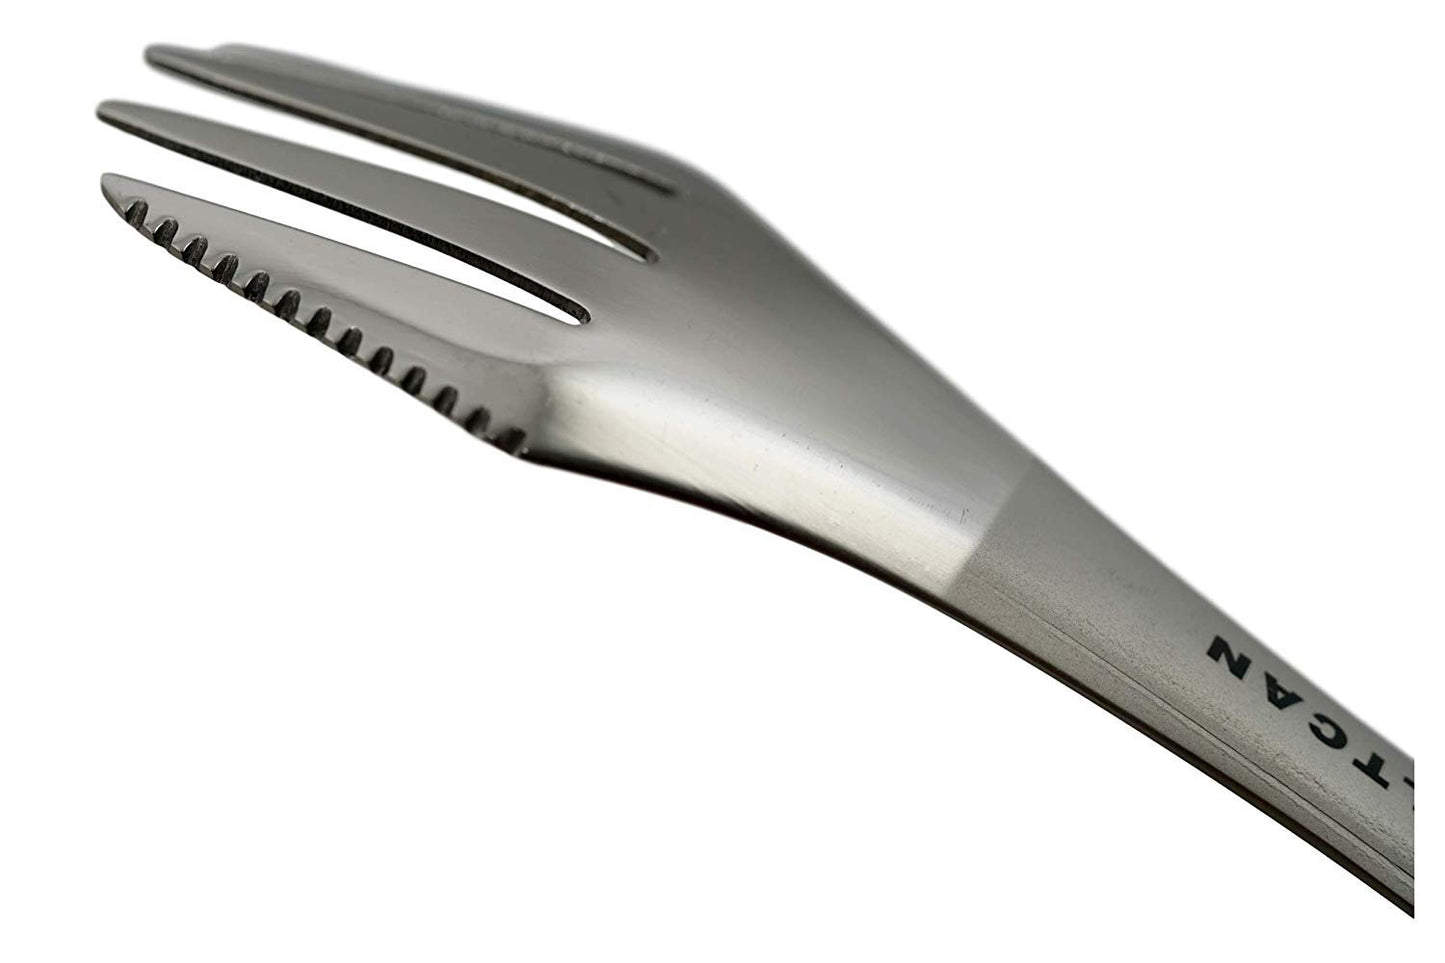 Valtcan Titanium Spork with Polished Ends - Ultra Light for Mess Kit Camping Utensils 24g